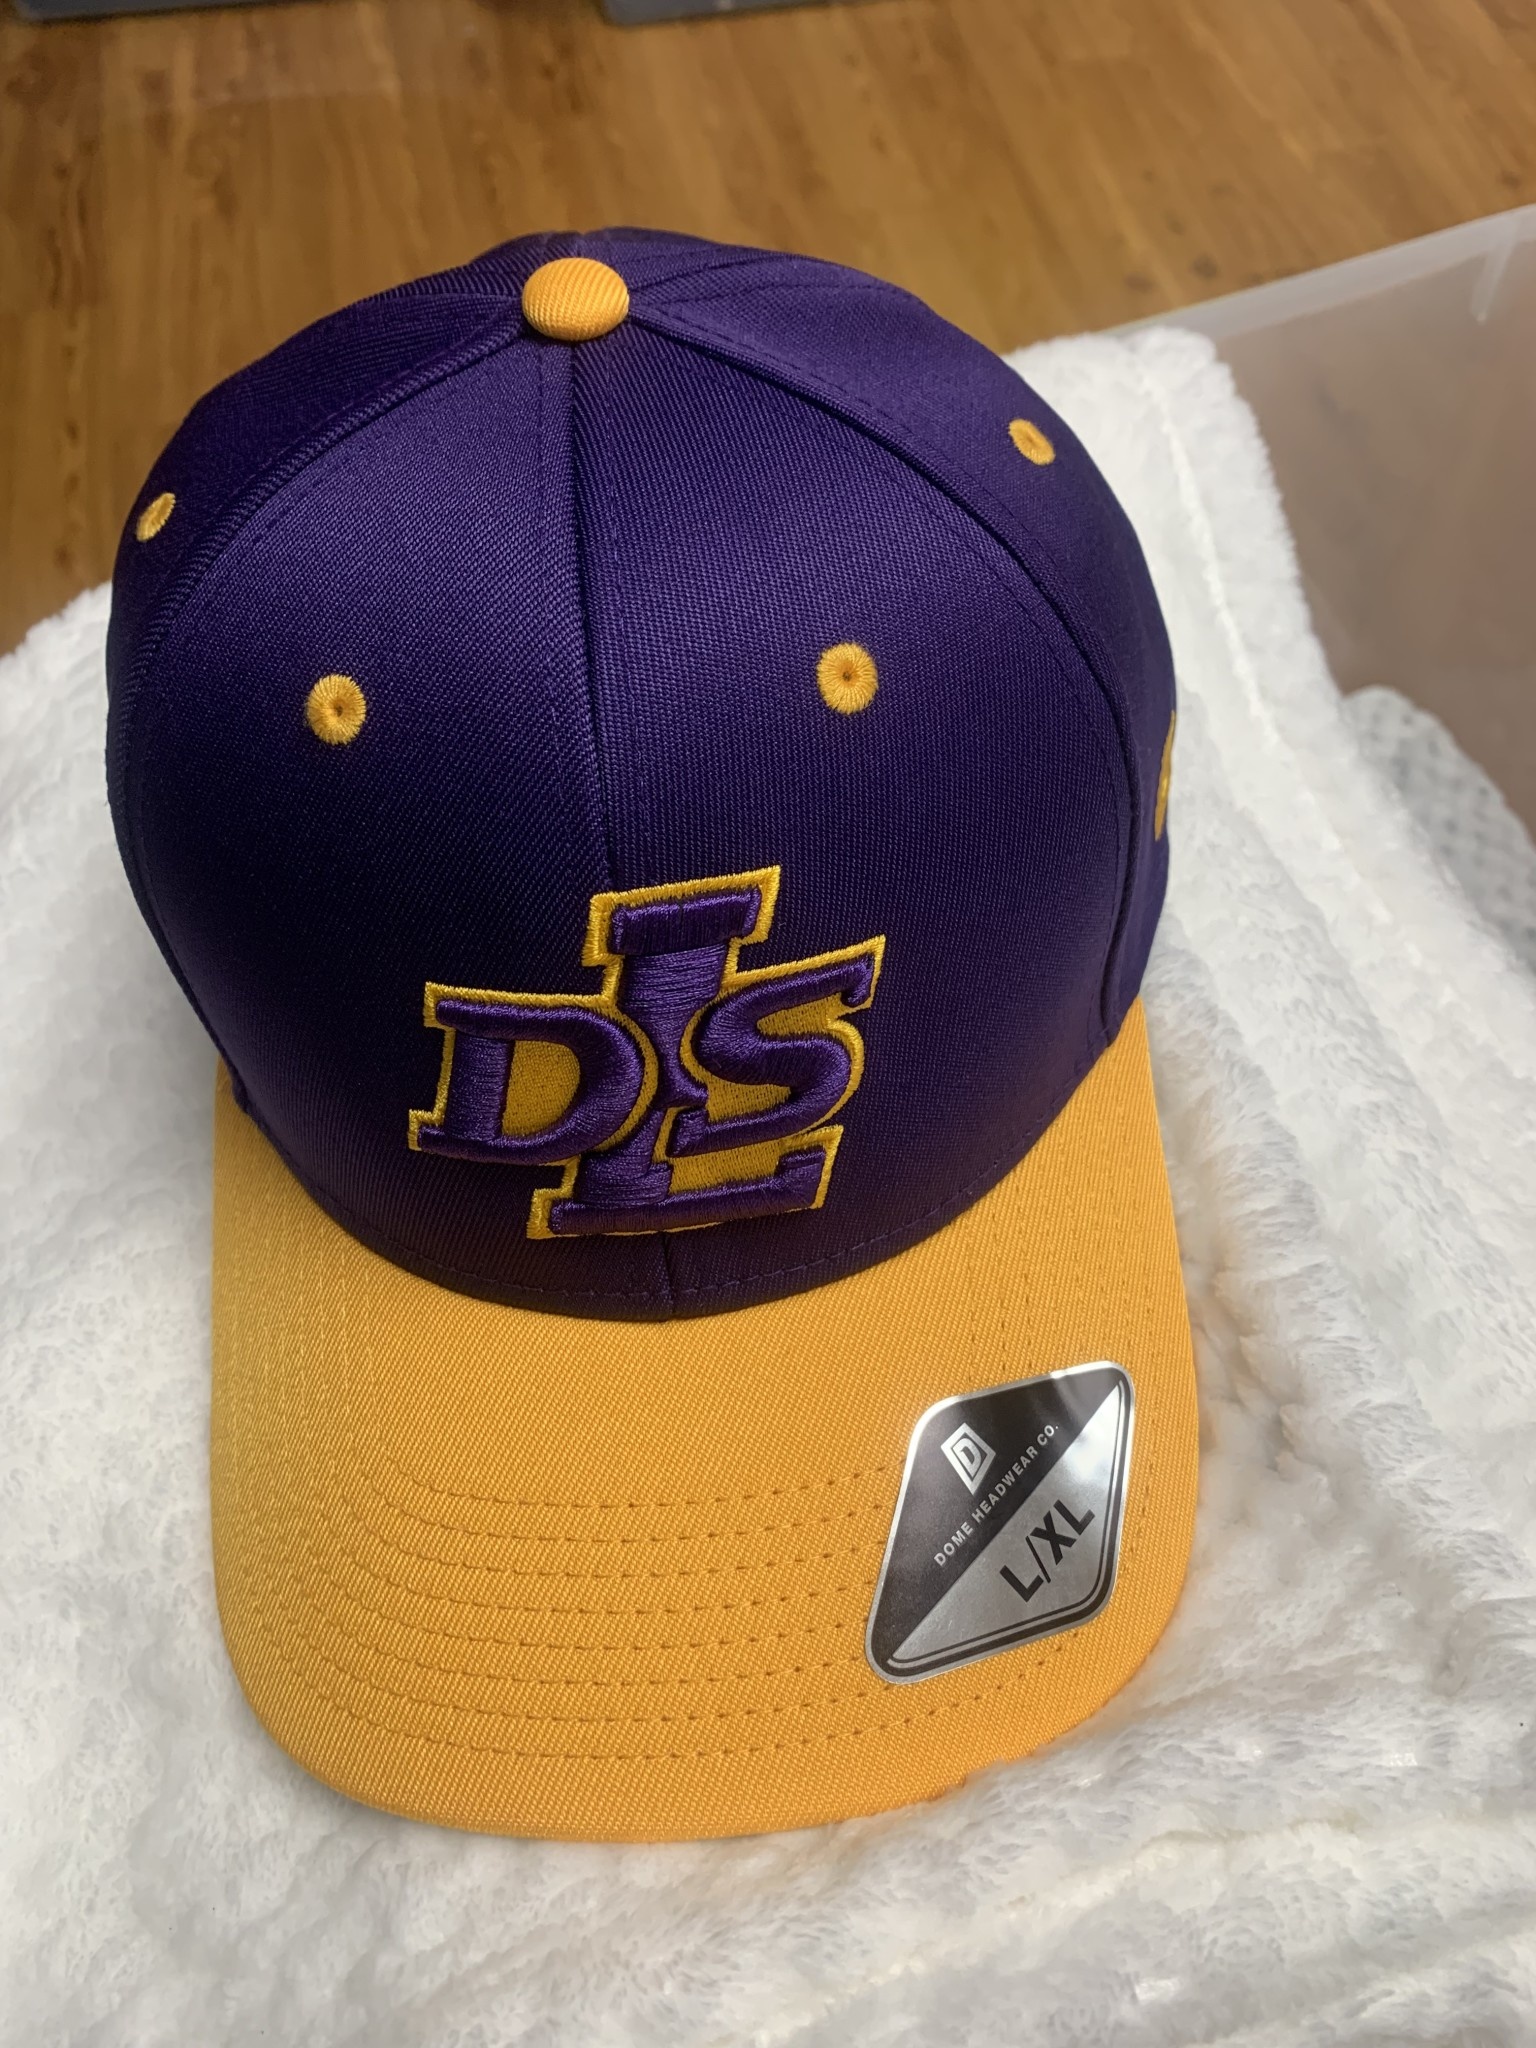 Dome Headwear DLS Fitted Adult Baseball Hat - The Pilot Hangar